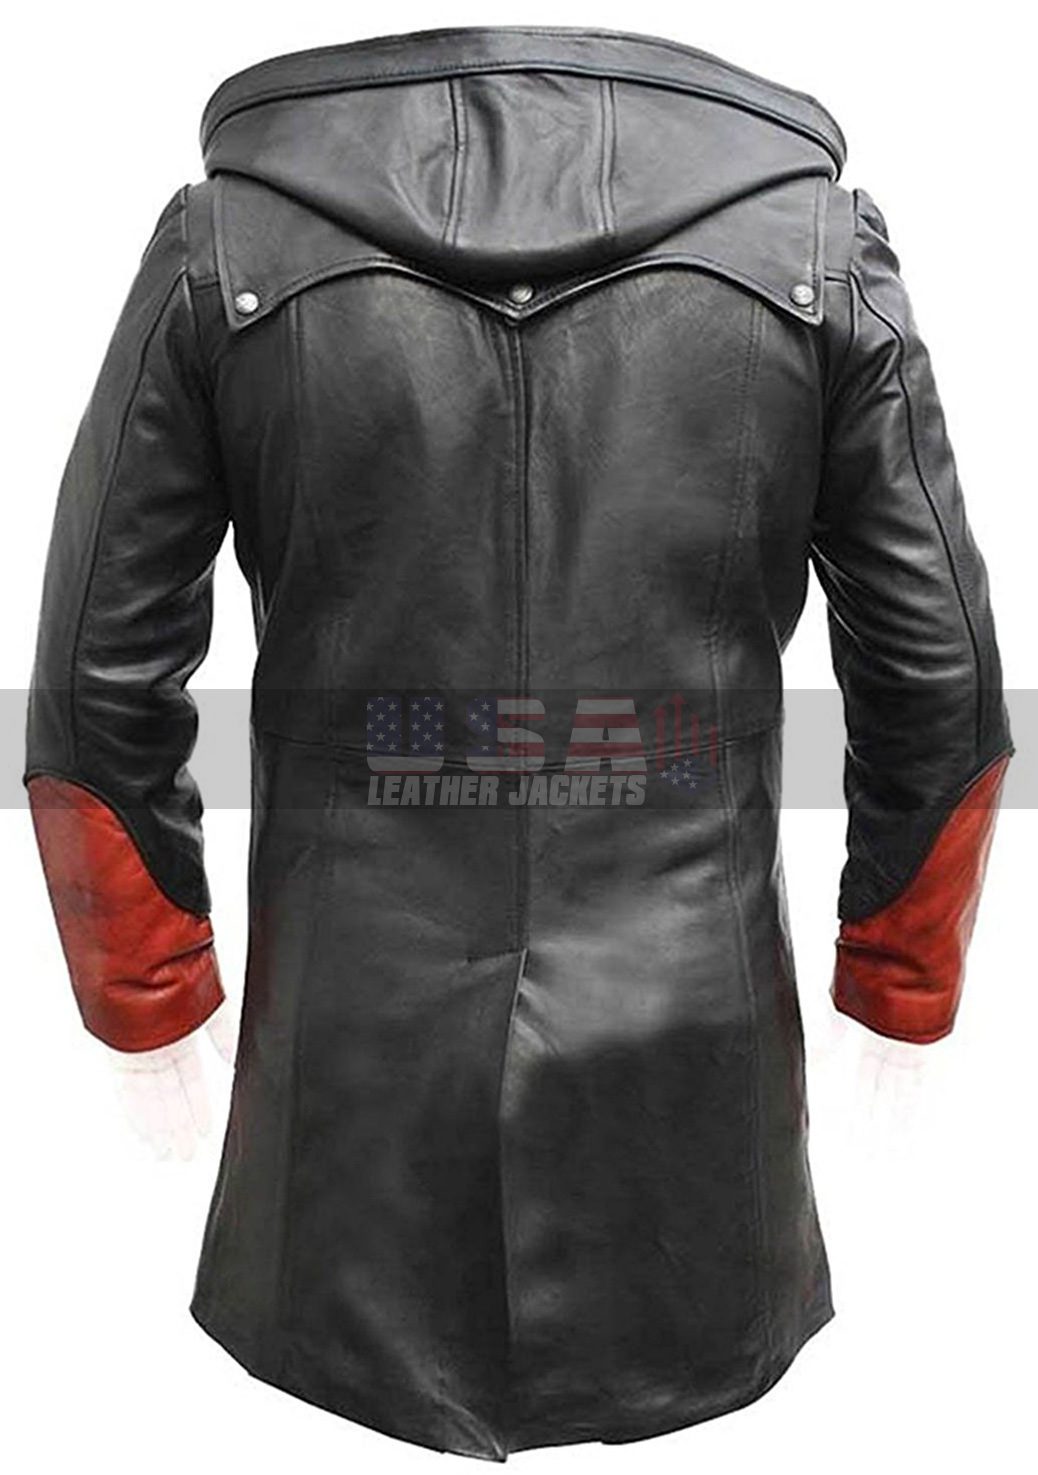 Devil May Cry Dante Slayer Trench Costume Hooded Leather Coat